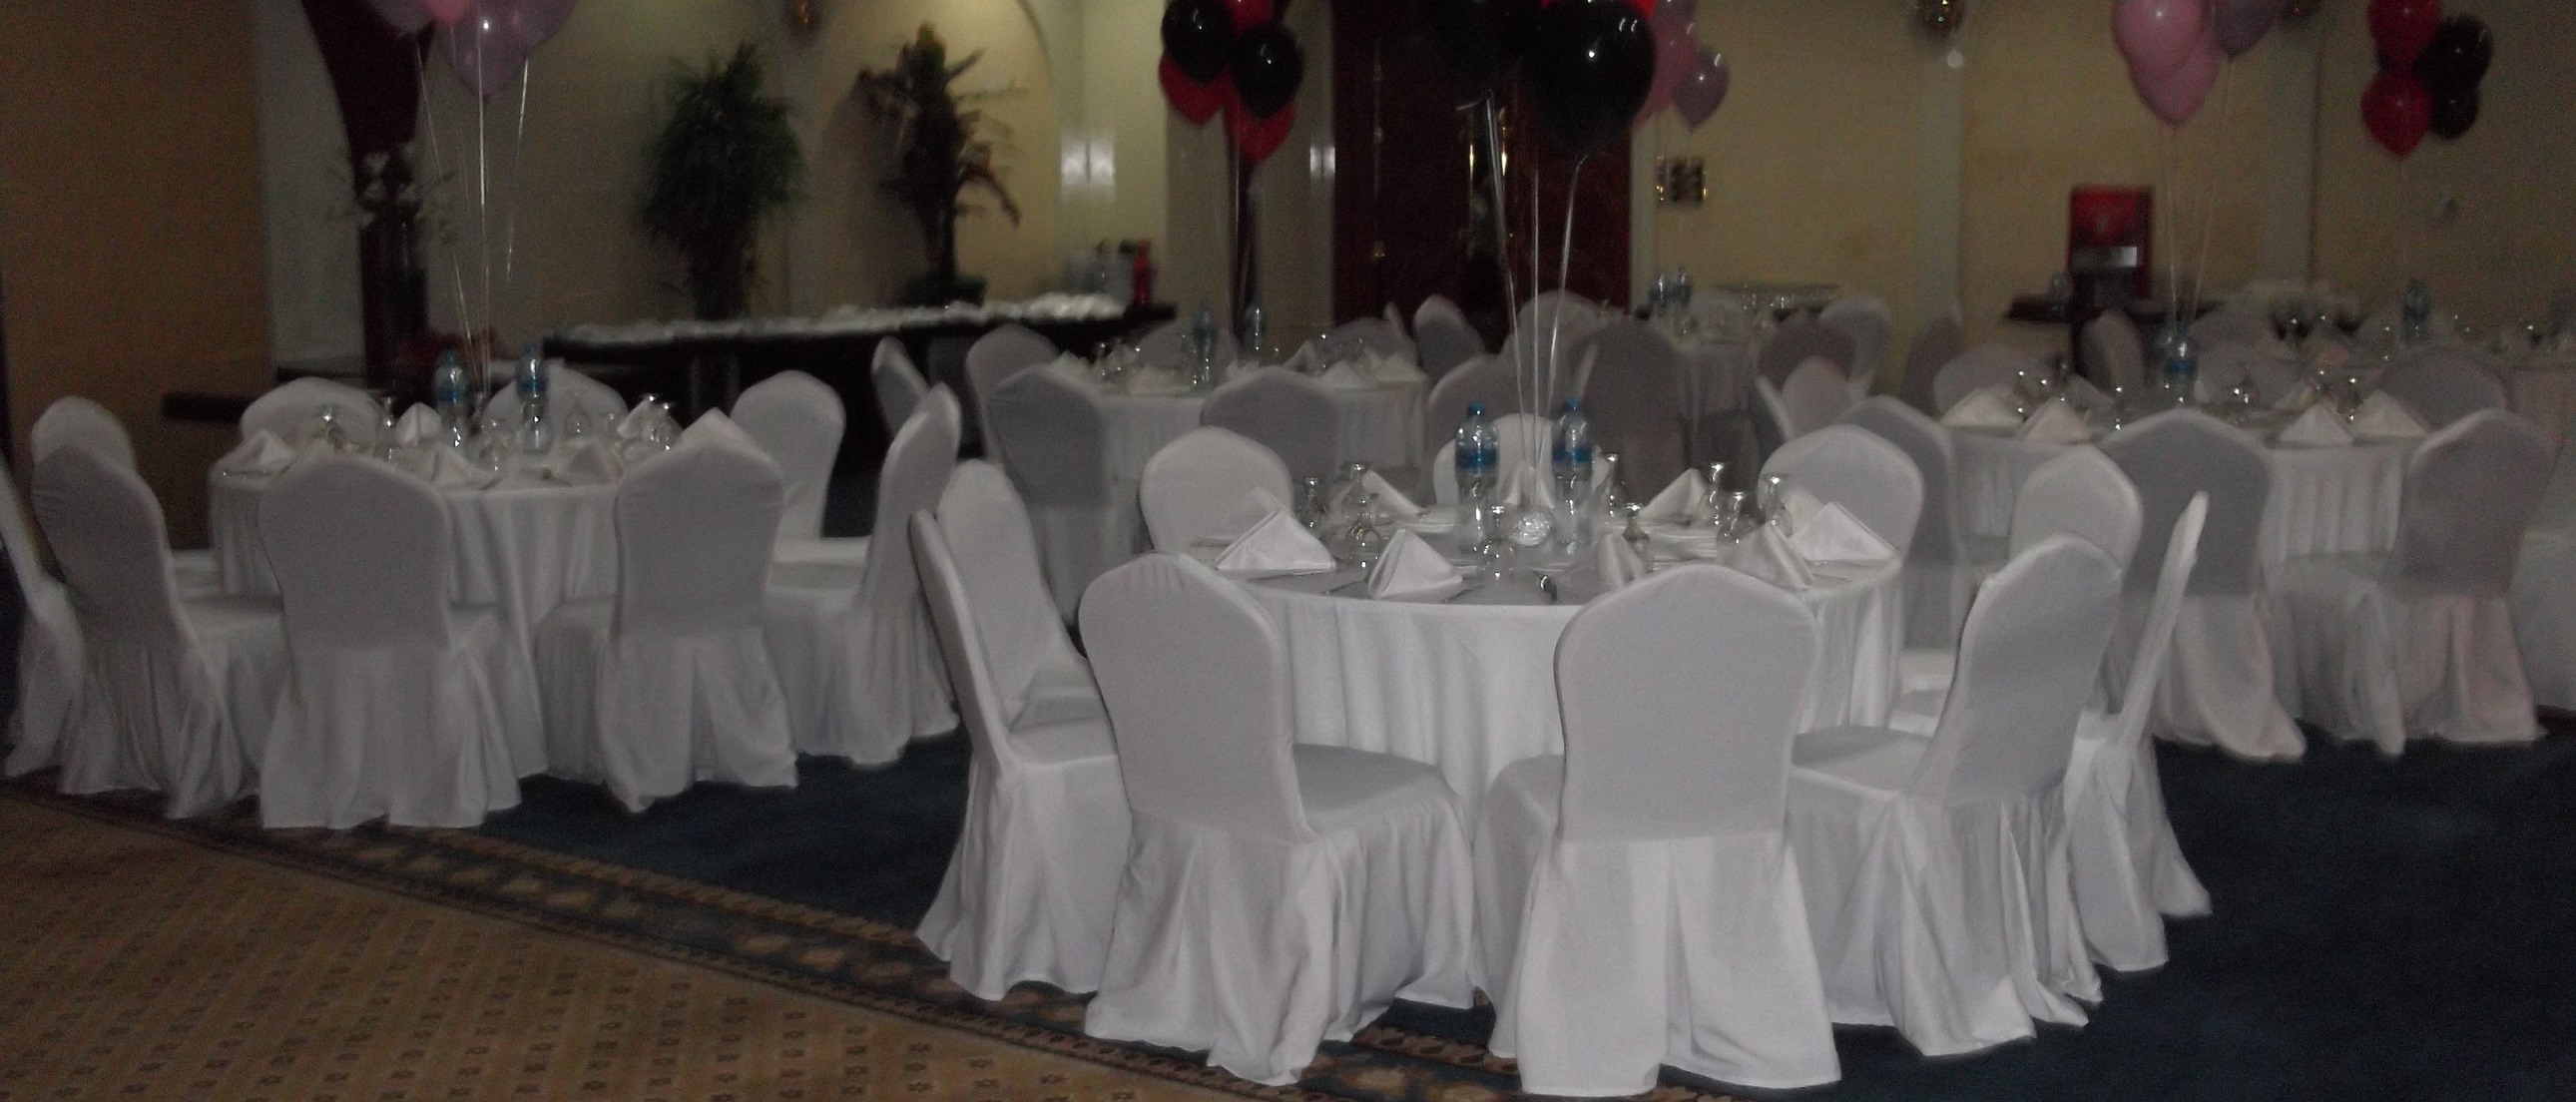 Adults And Kids Furniture Rental Hire Party Tables Chairs Rental